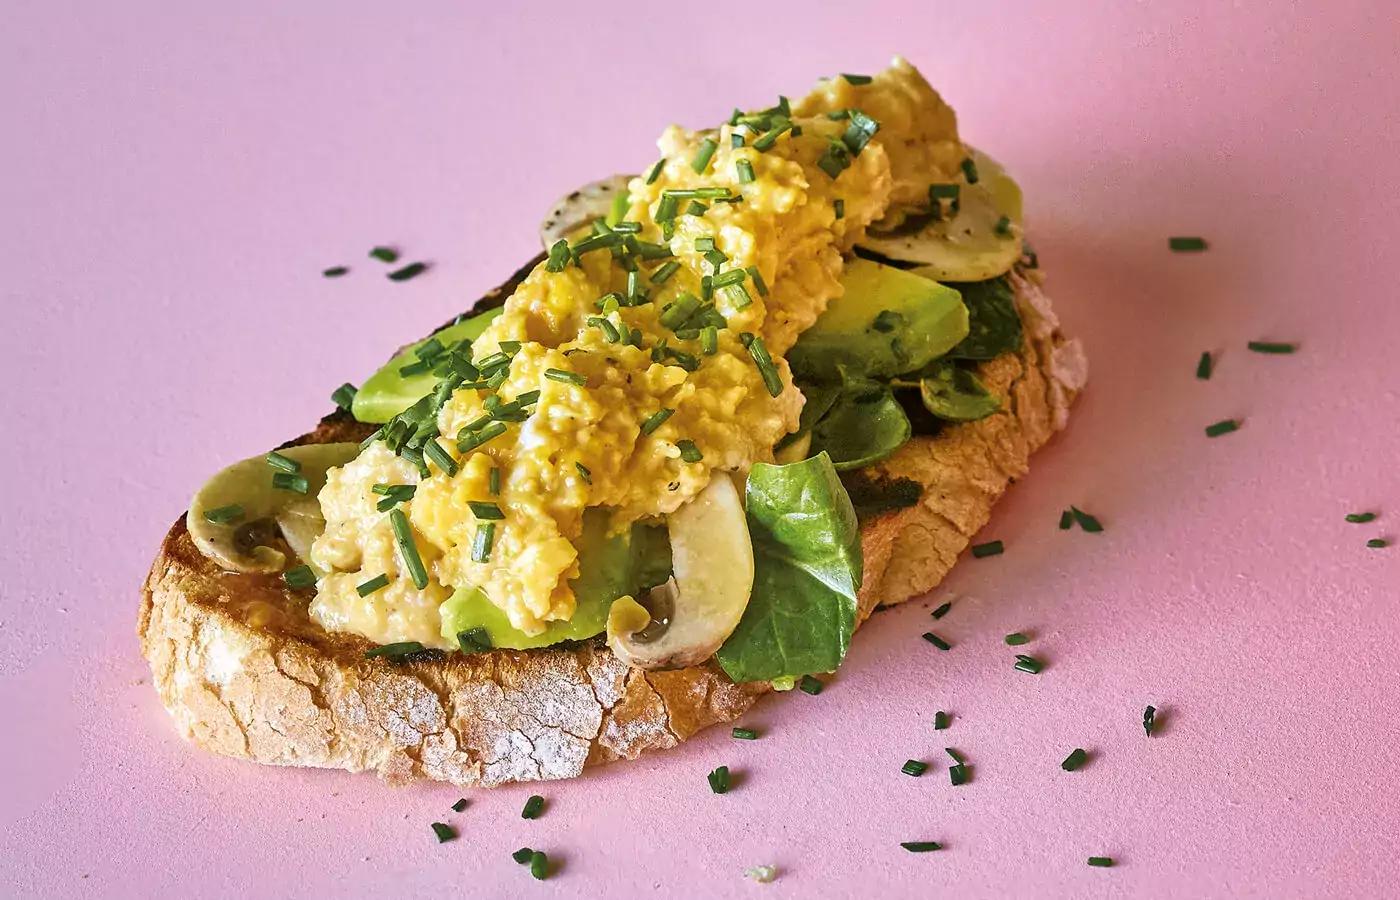 Scrambled eggs with avocado and whole wheat toast